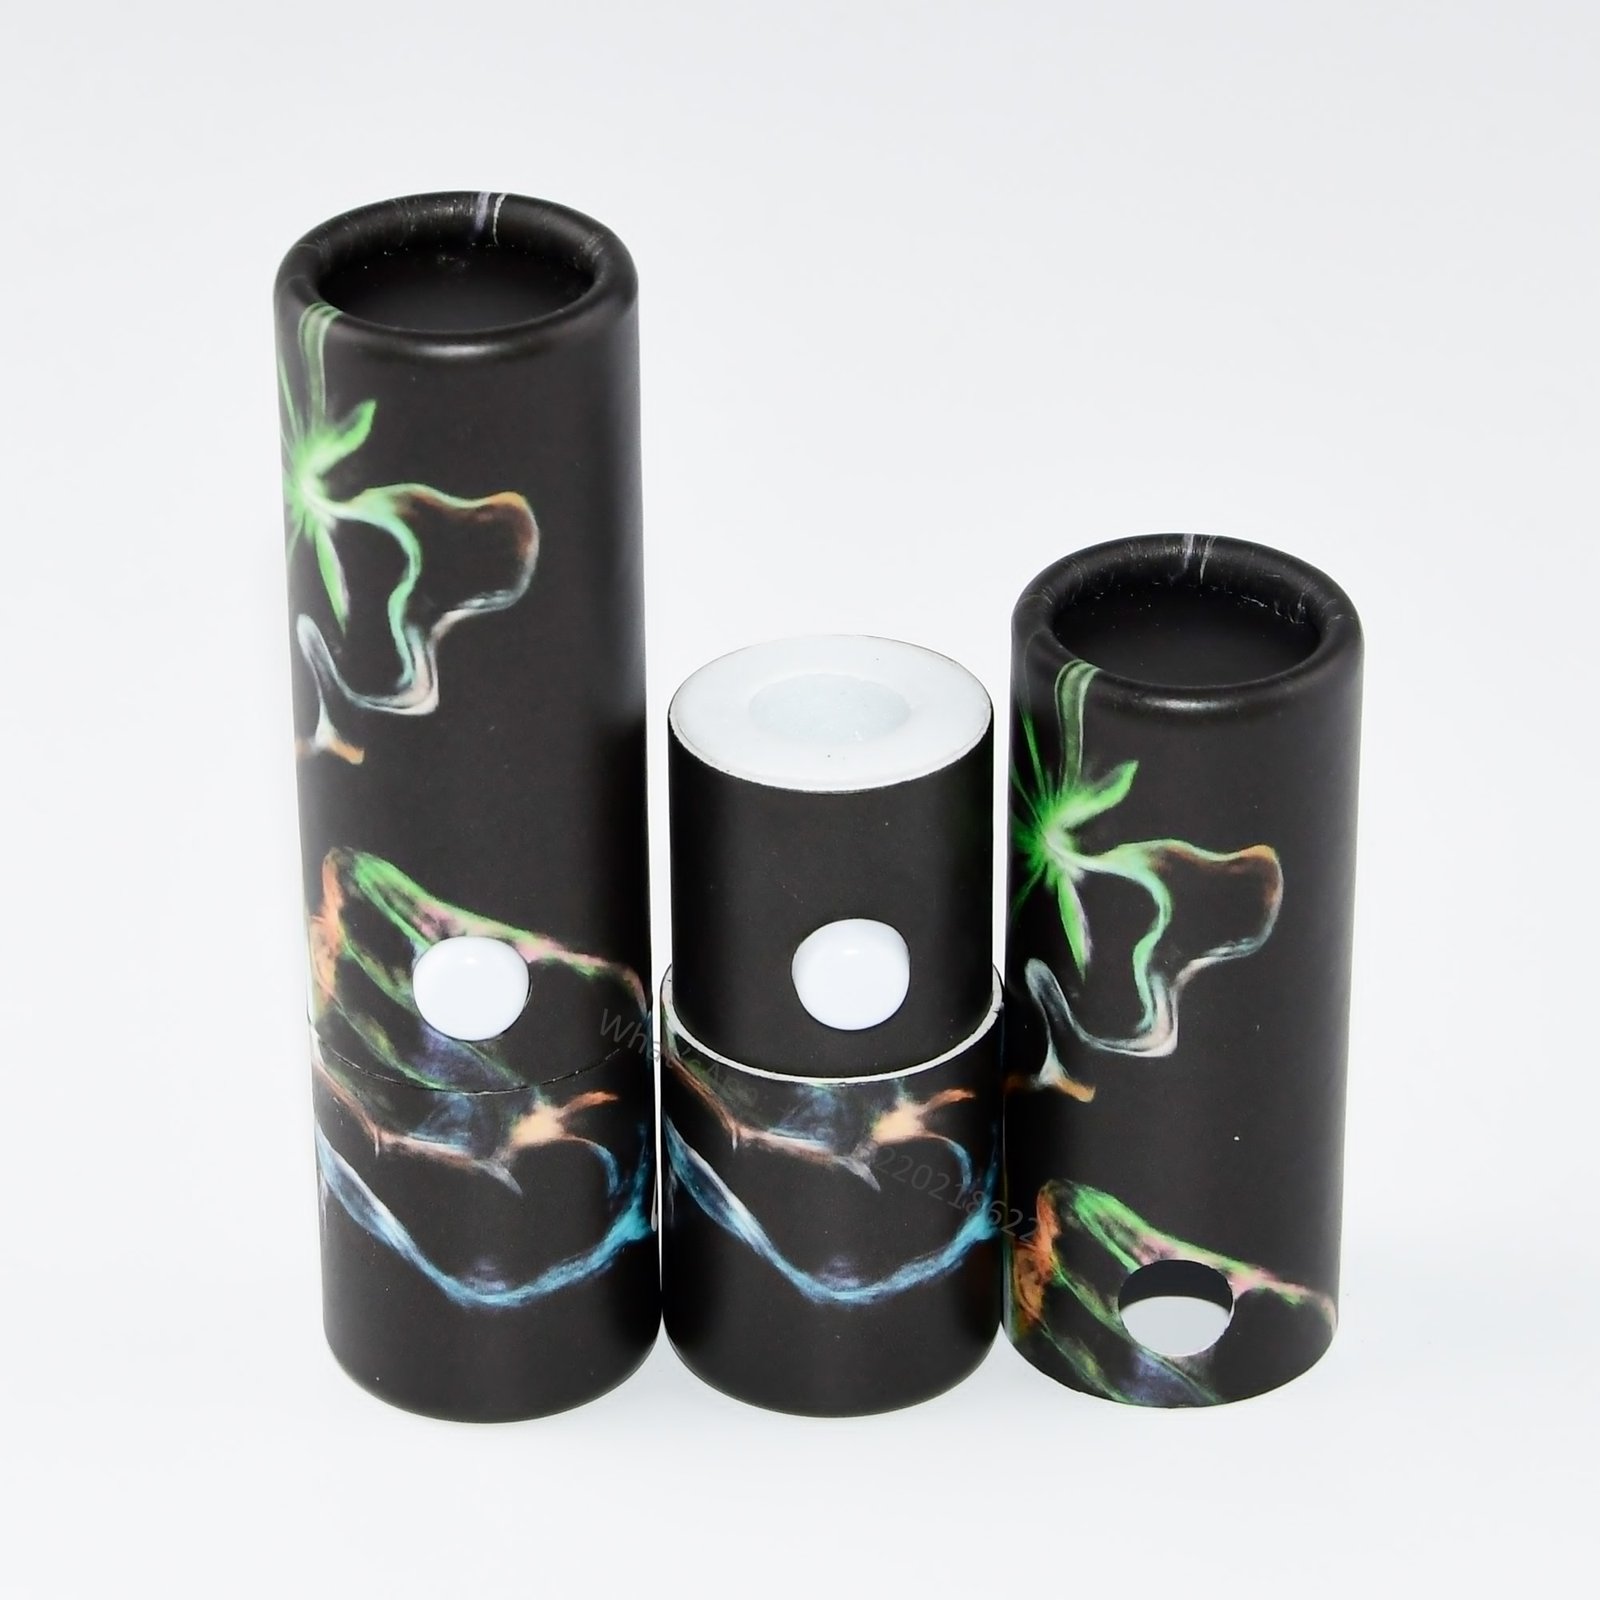 Recyclable Child Resistant Paperboard Tubes